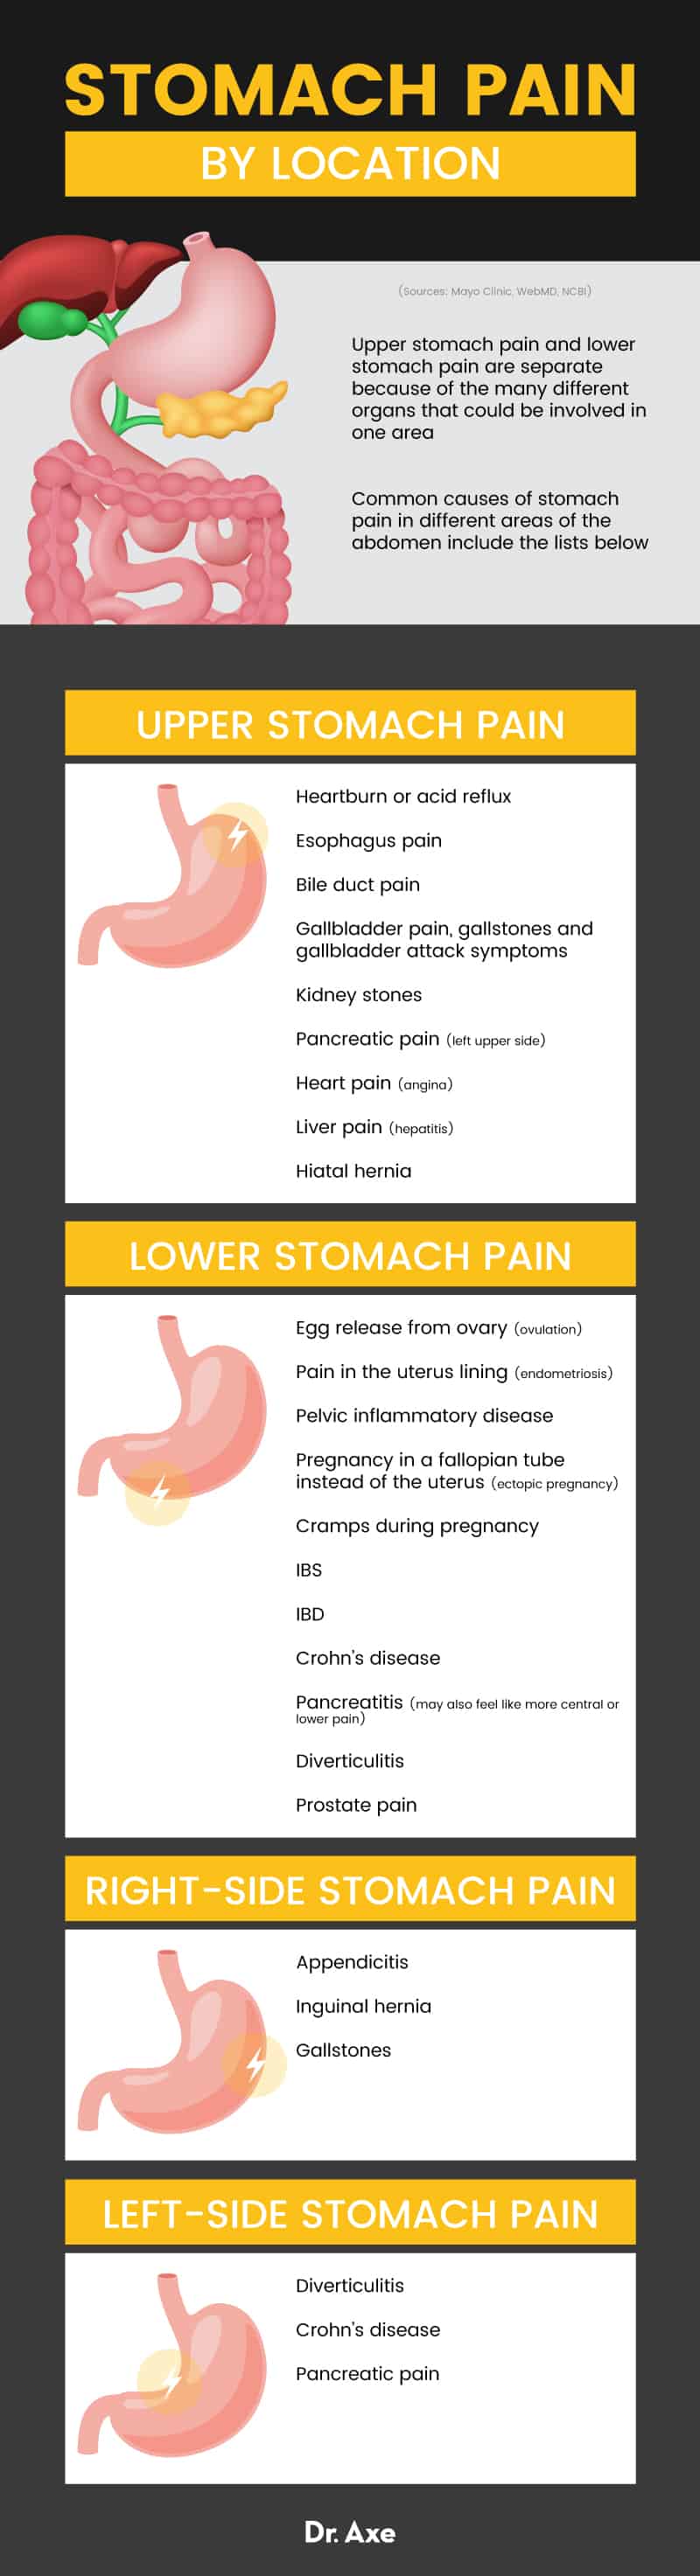 Stomach pain by location - Dr. Axe